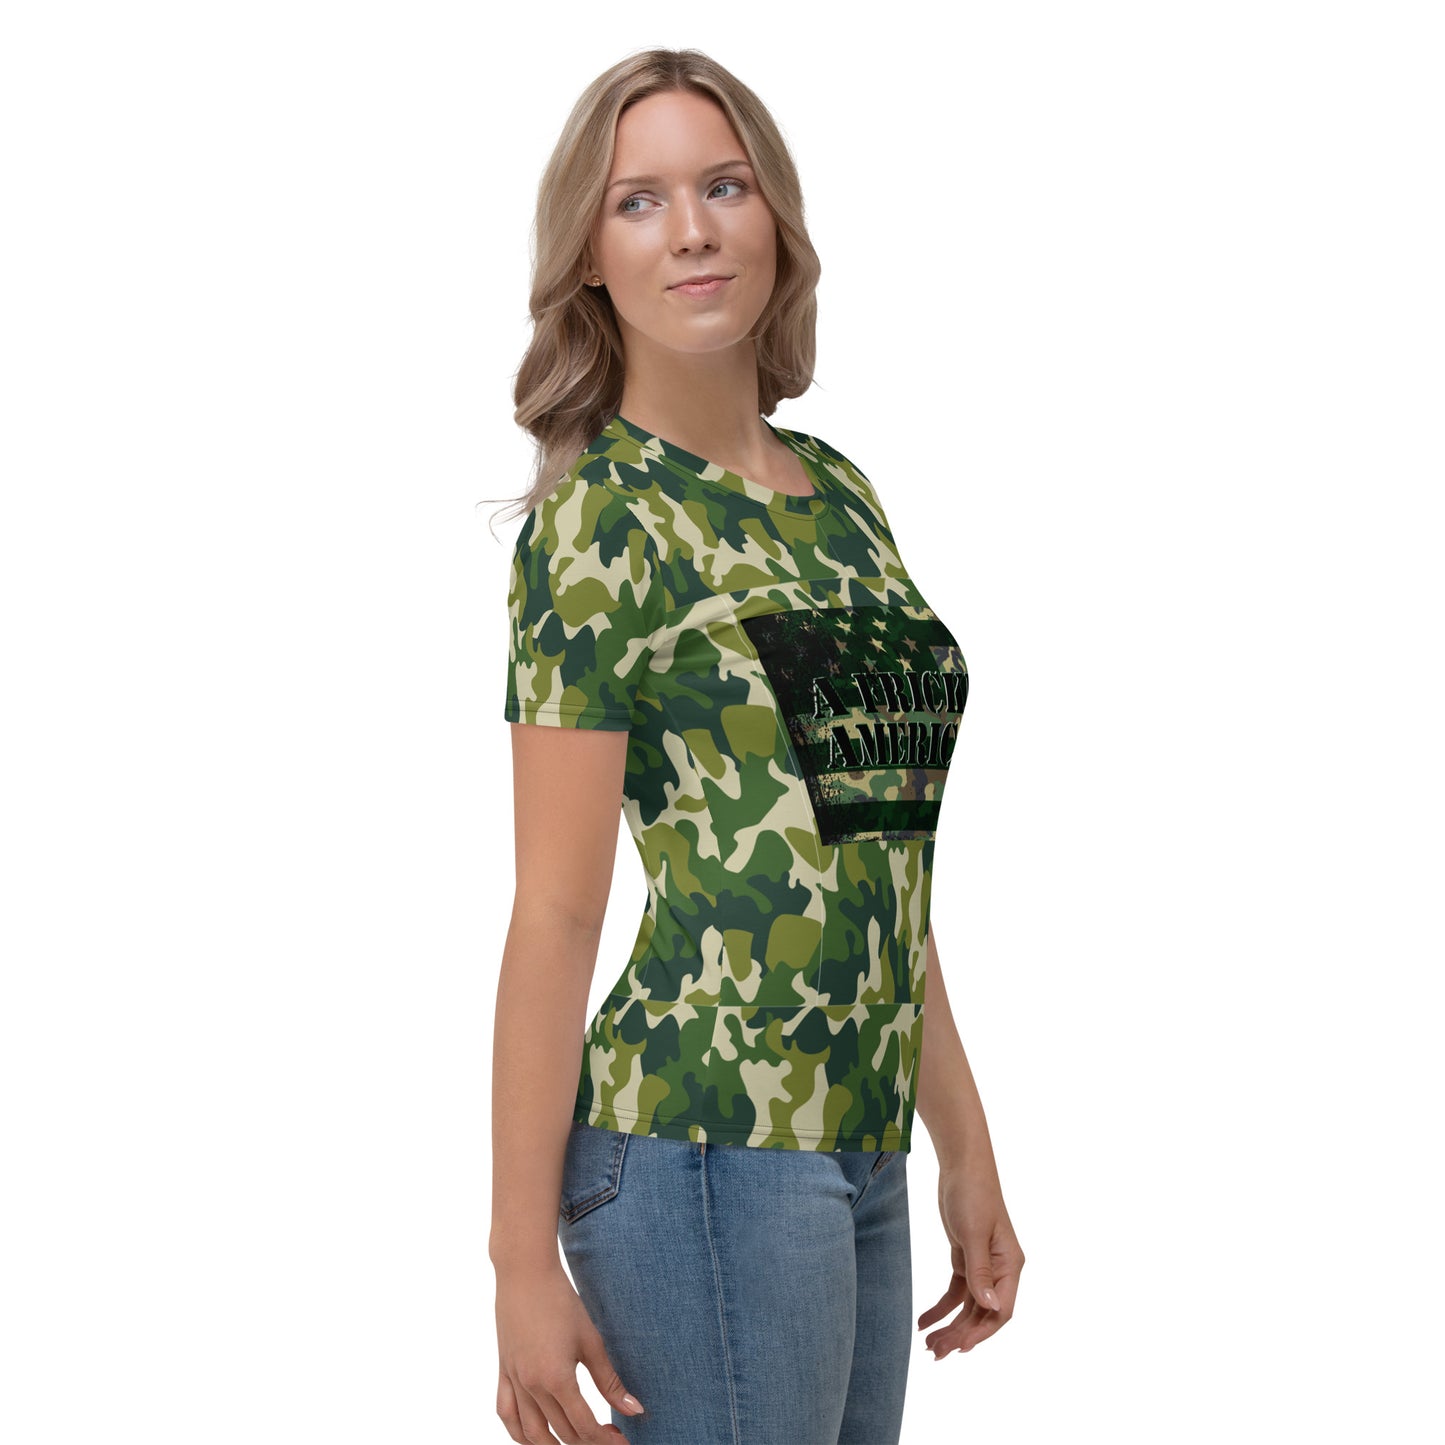 A Frickin American All Camouflage- Women's T-shirt